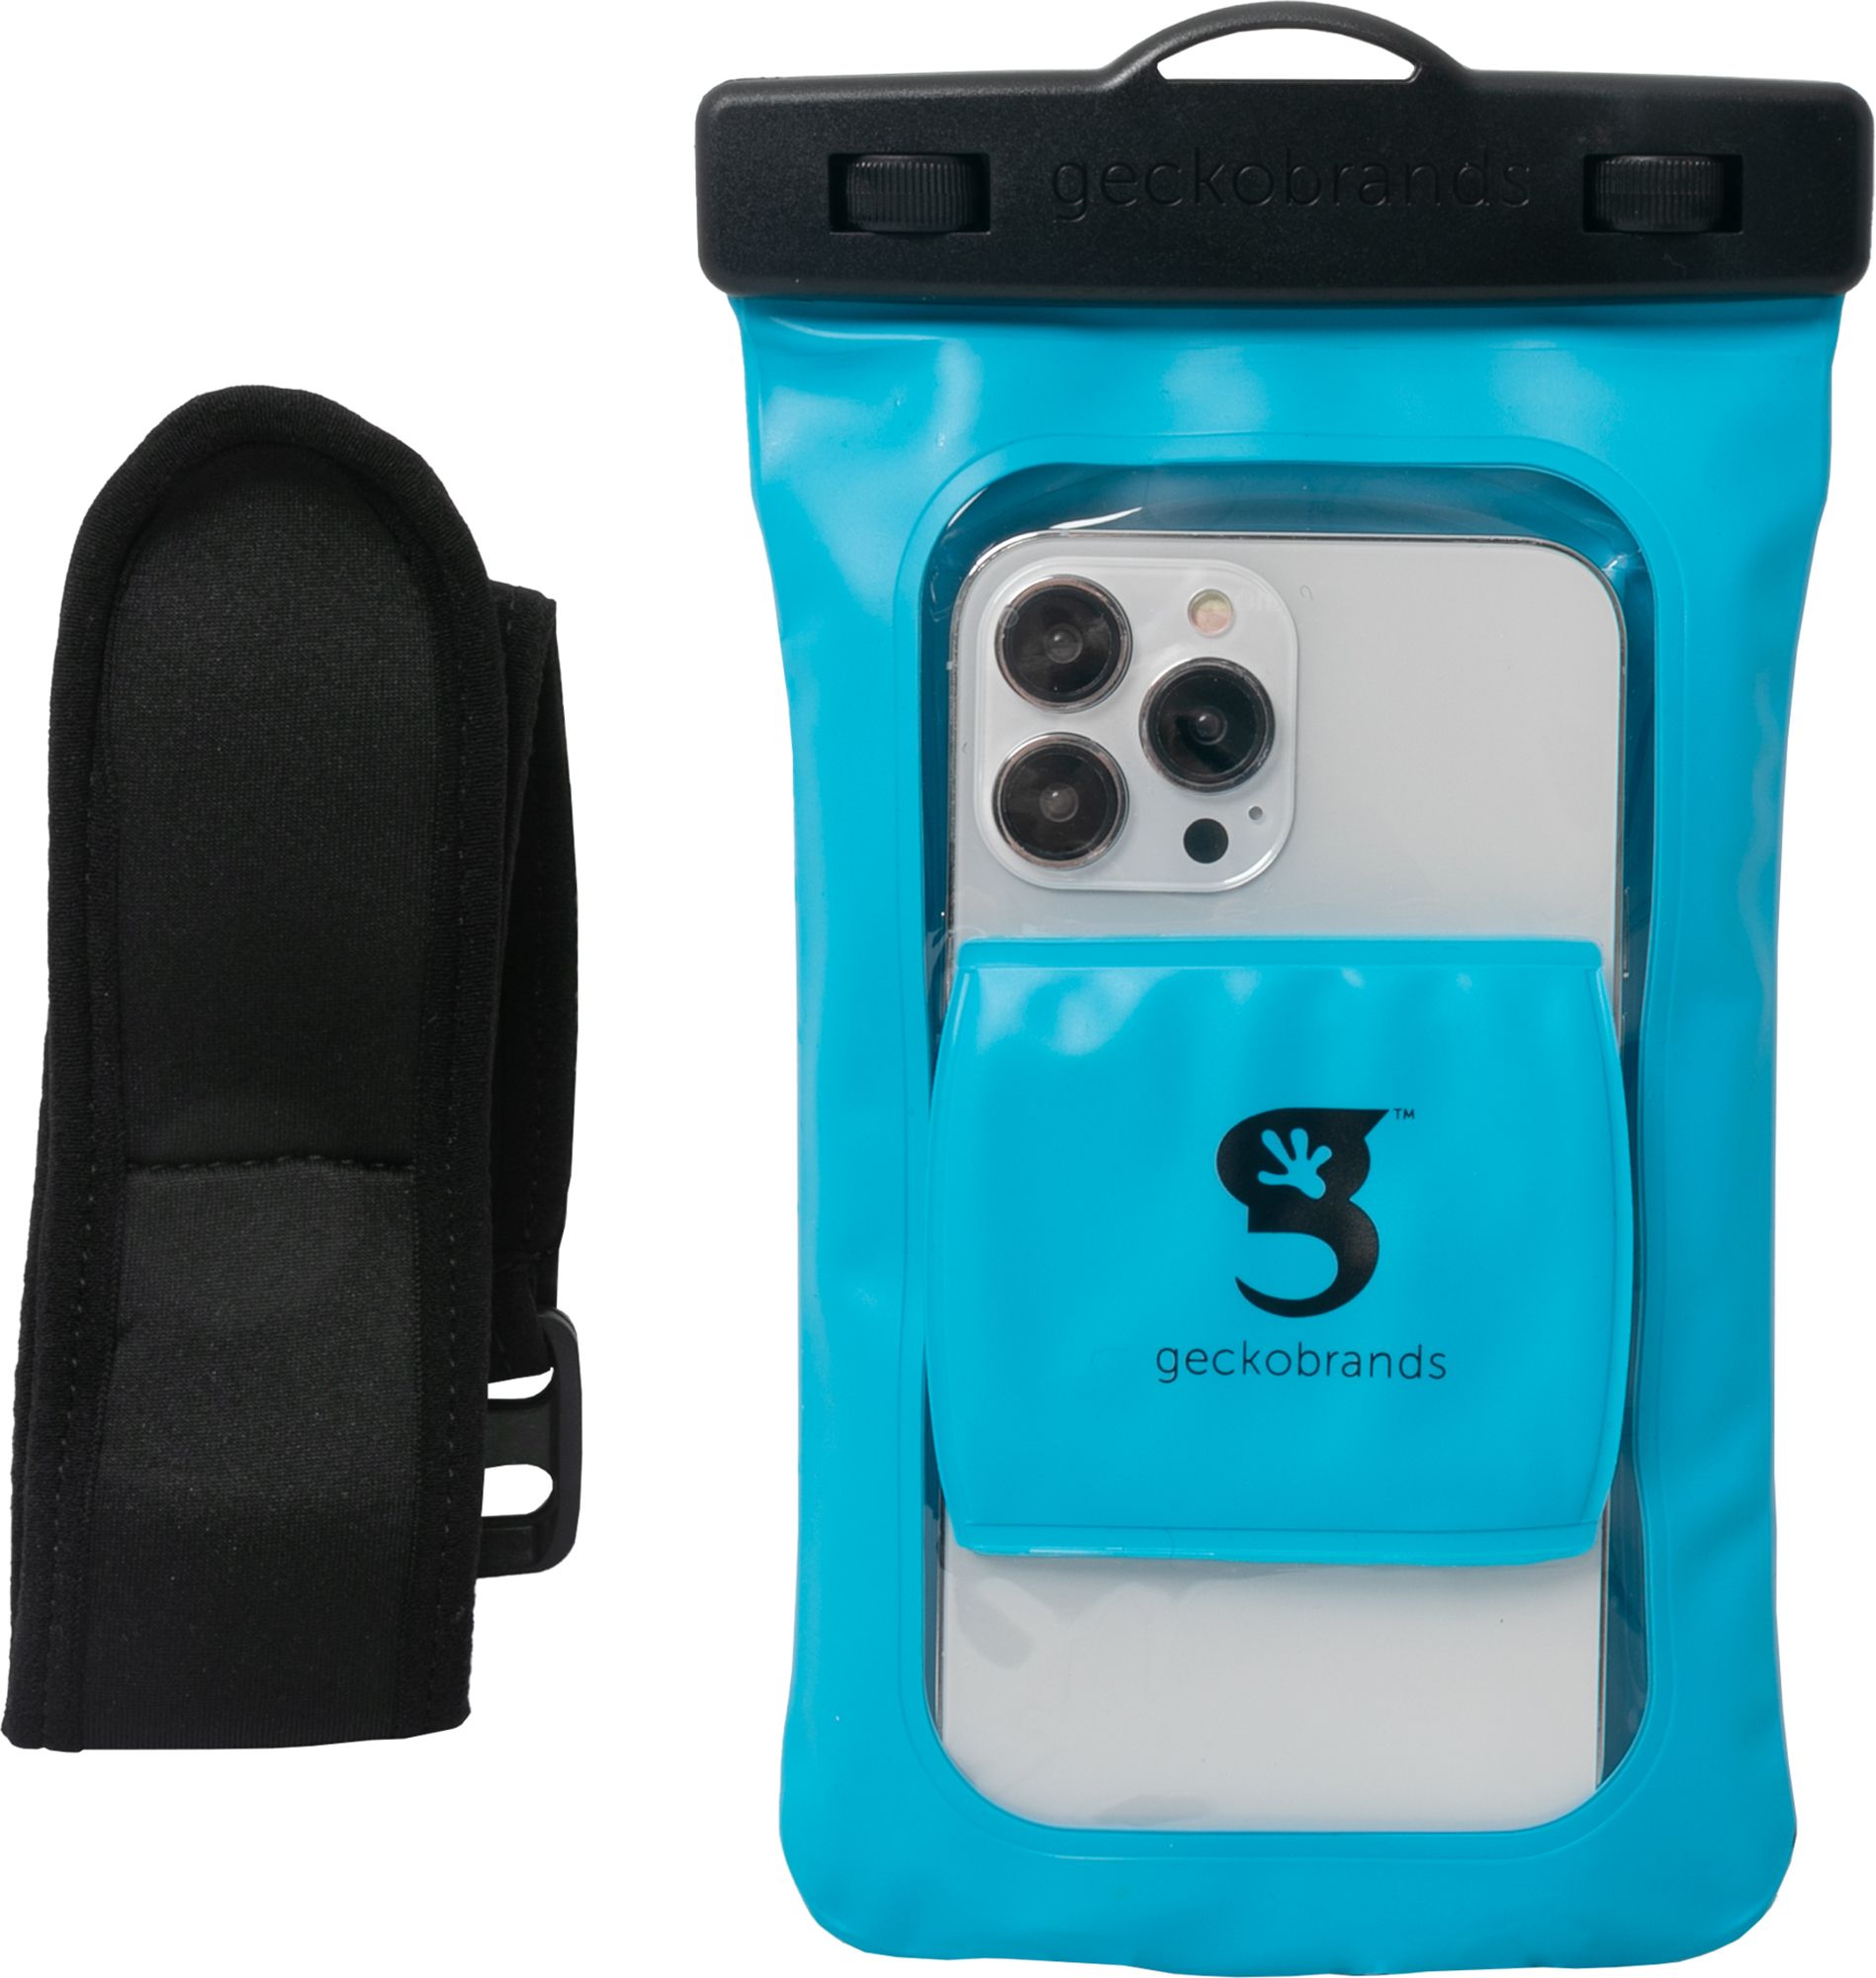 geckobrands Float Phone Dry Bag with Arm Band